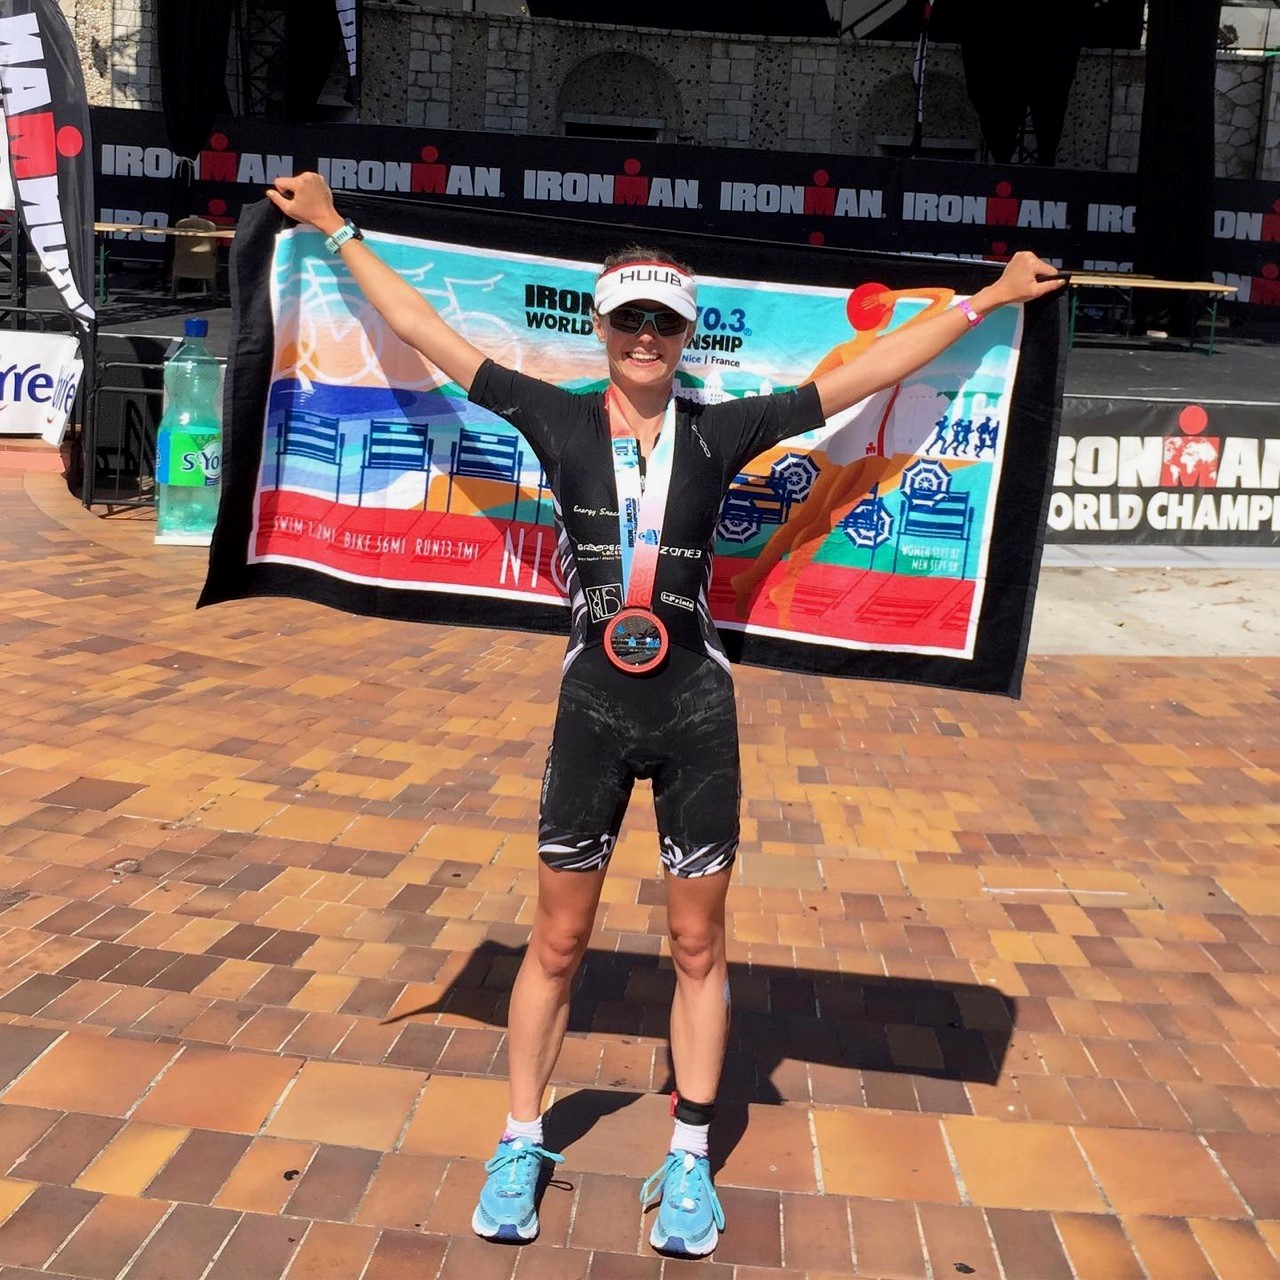 Hereford triathlete completes first world championship with support from BBR Optometry